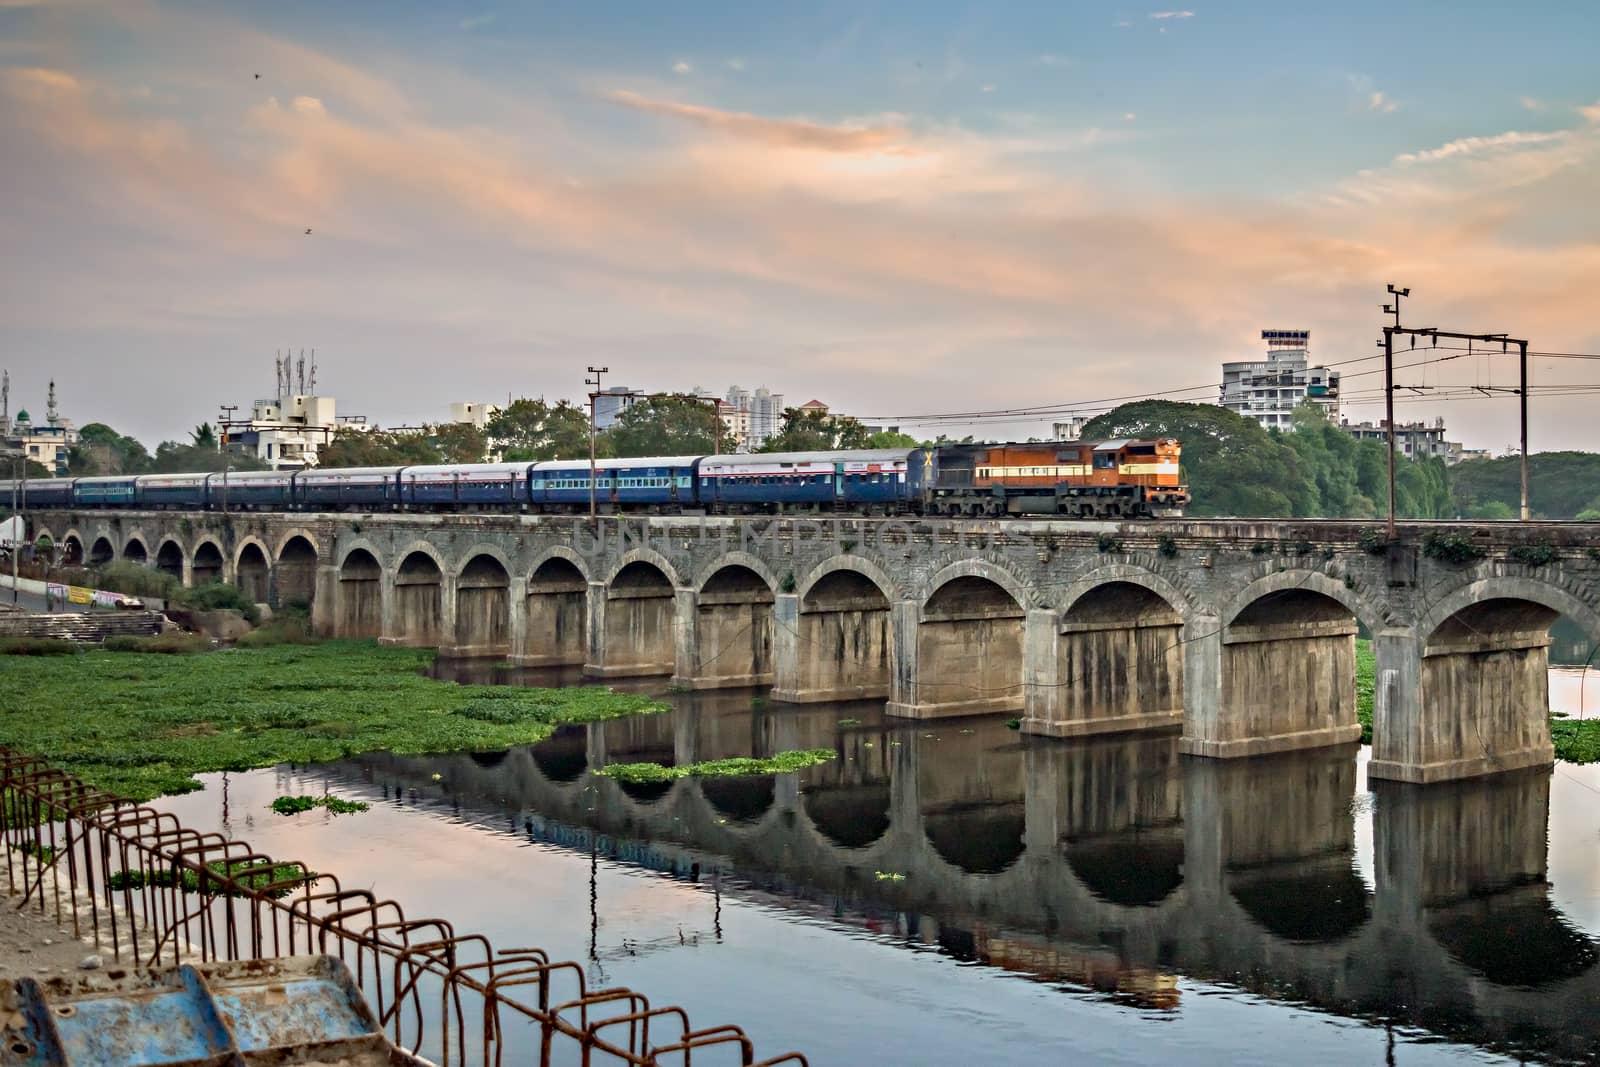 Train passing over an old bridge named Sangam bridge, with nice reflection in water in Pune, Maharashtra. by lalam